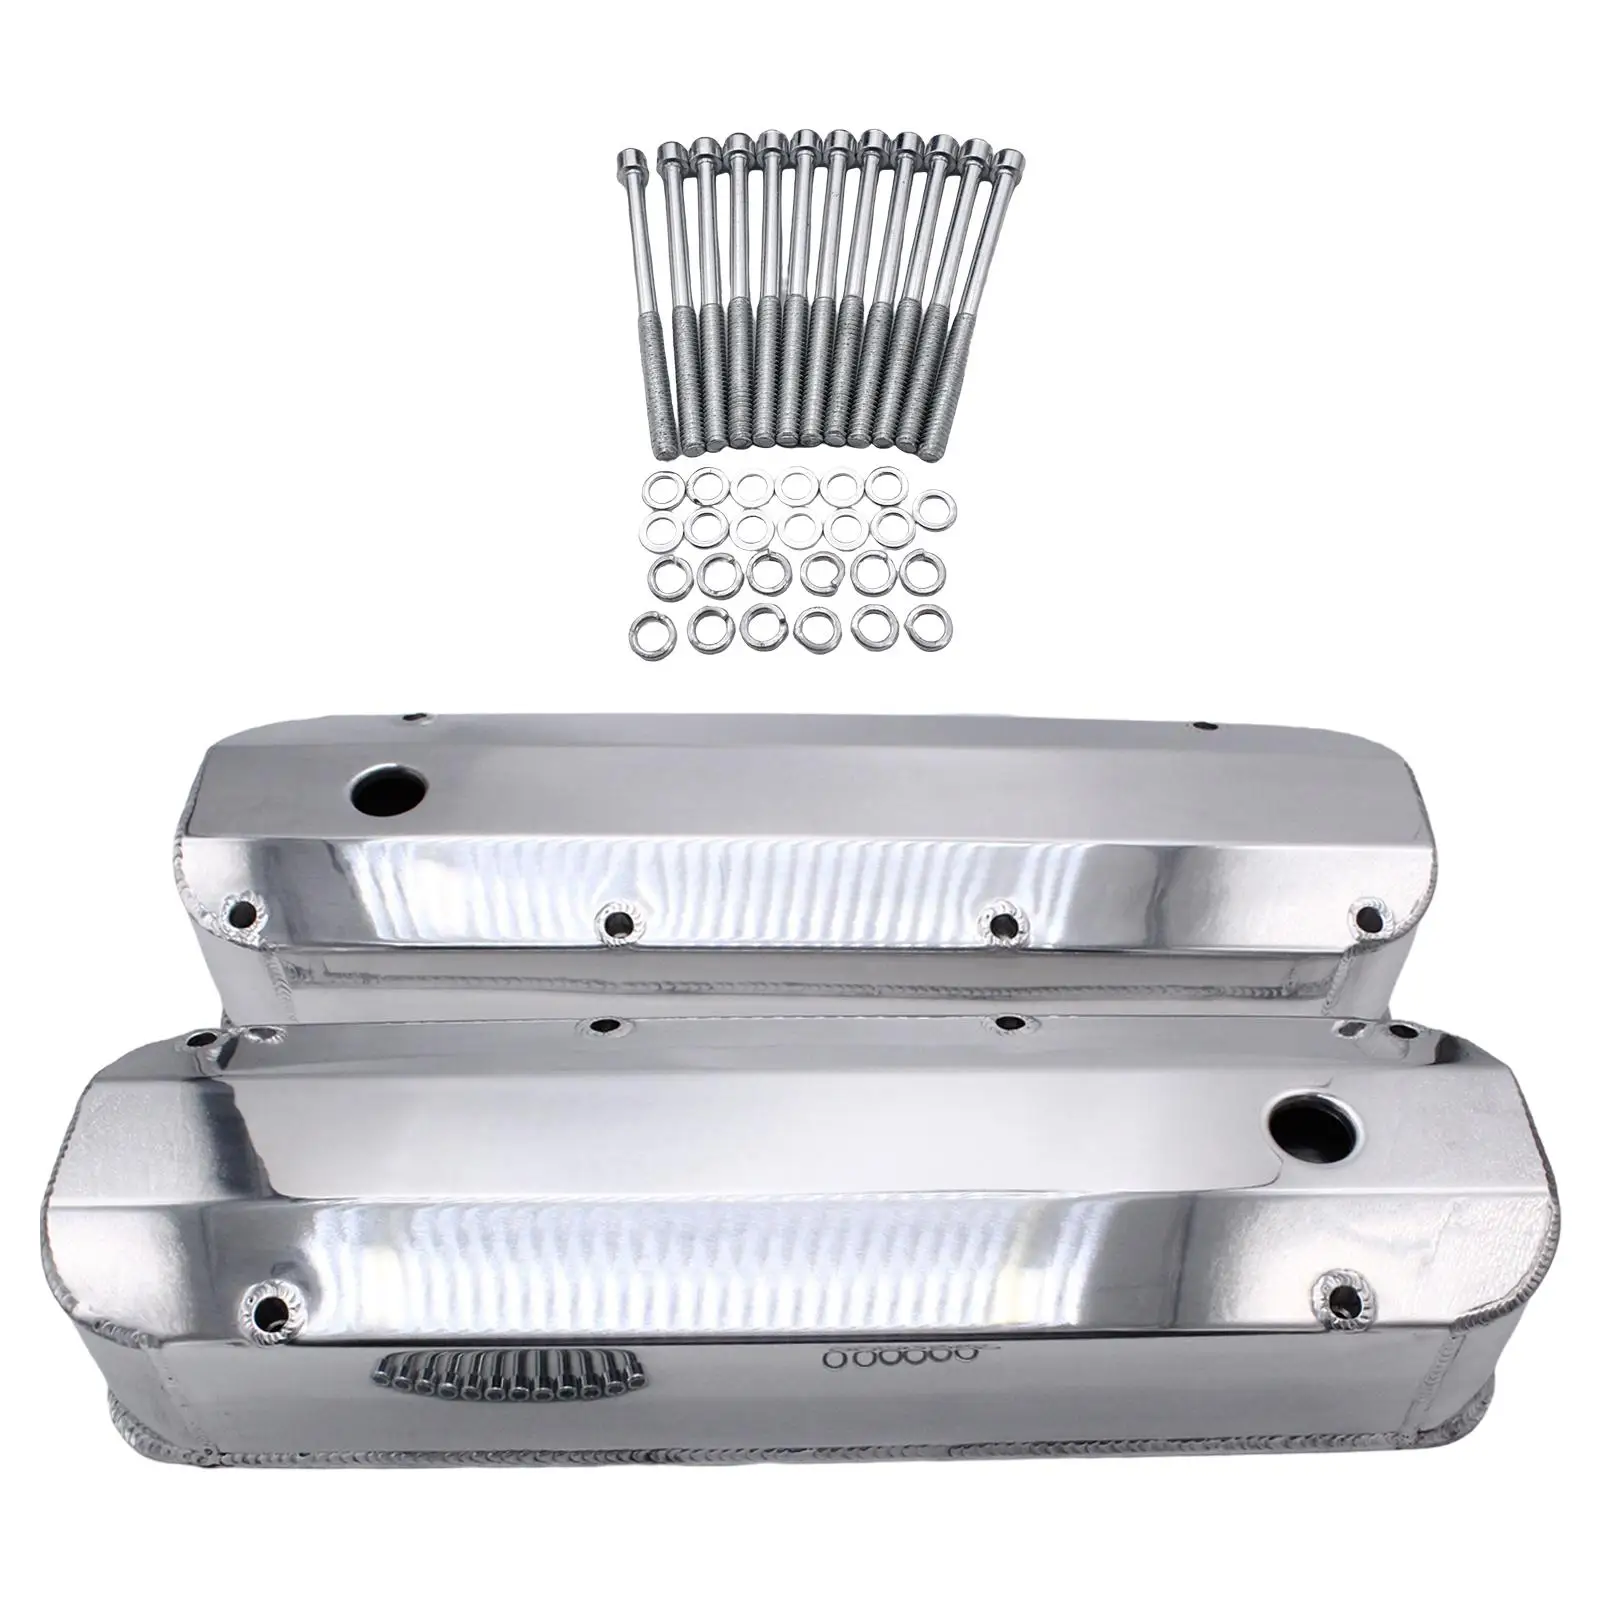 Valve Covers with Long Bolts Baffles Replace Parts for Ford Bbf 429 460 V8 Engines Big Block Engine Parts High Performance